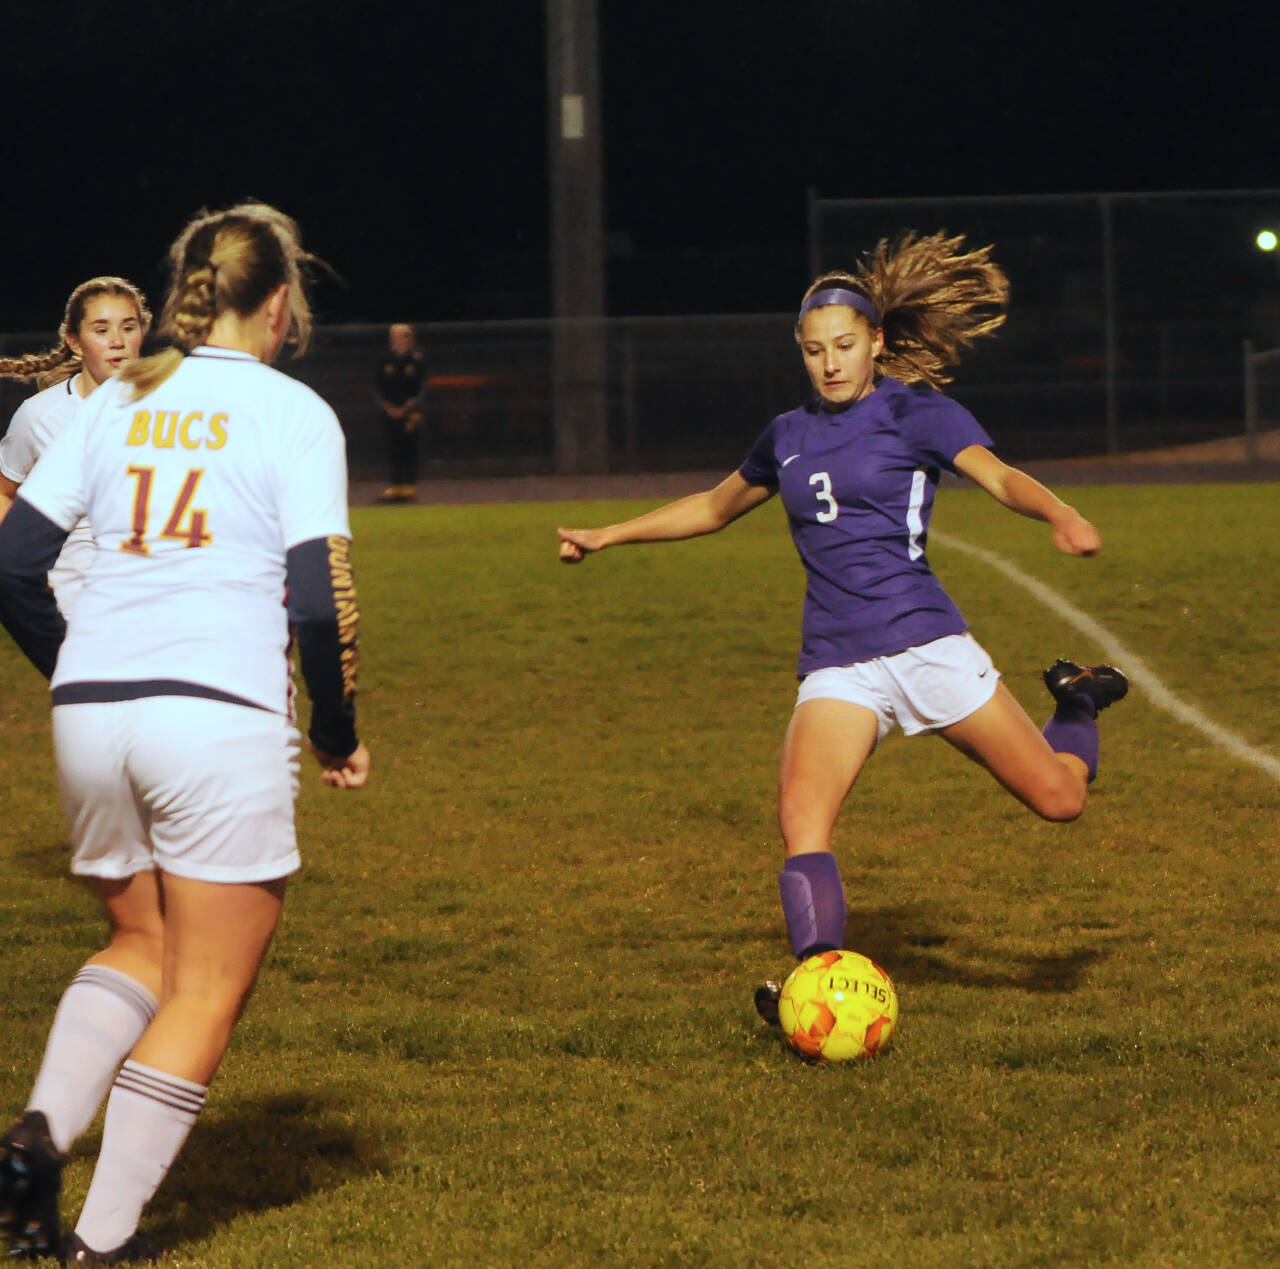 SEQUIM GAZETTE PHOTO BY Michael DashielL
Sequim’s Taryn Johnson, right, looks for an open teammate as the Wolves take on Kingston at home on Oct. 27. Sequim won the Olympic league match-up, 4-0.